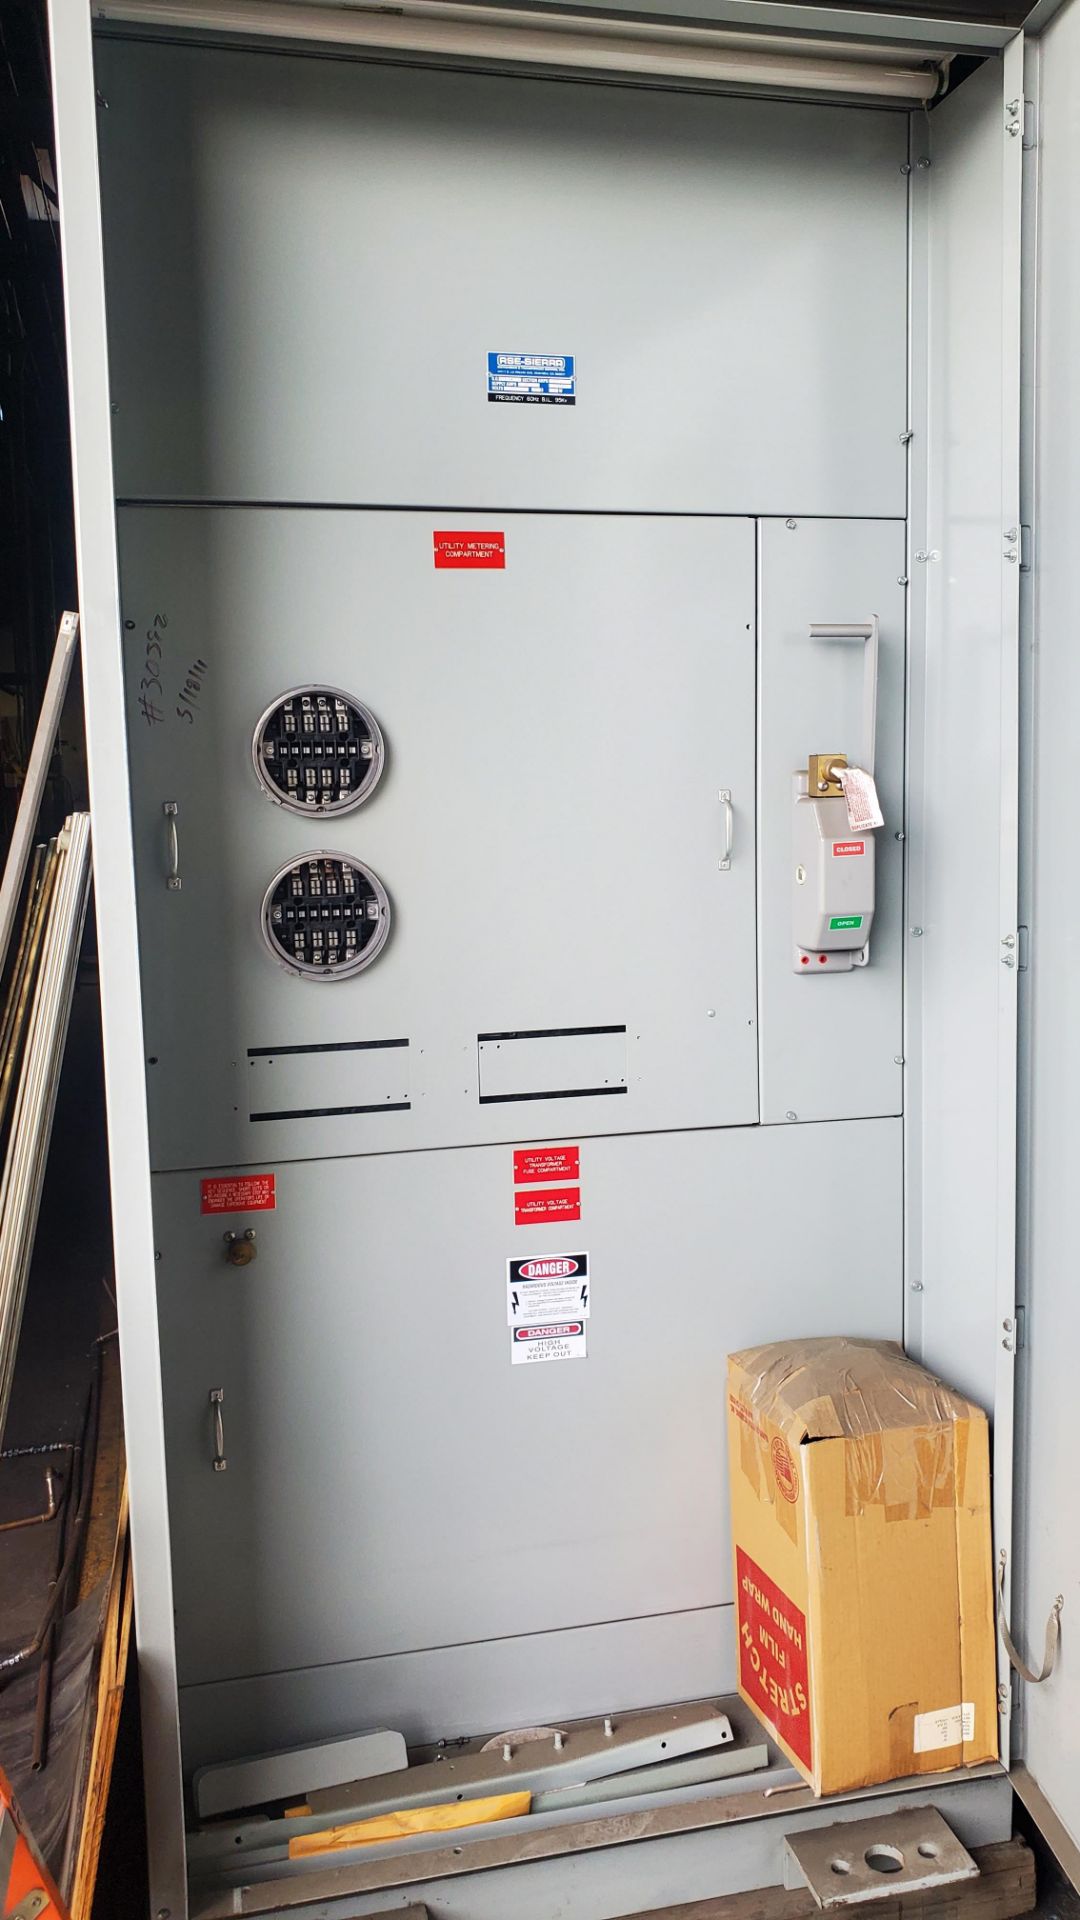 (Lot) RSE-Sierra 15 KV, 600A, Fuse Load (4 Sections) (LOADING FEES: $600) - Image 5 of 10